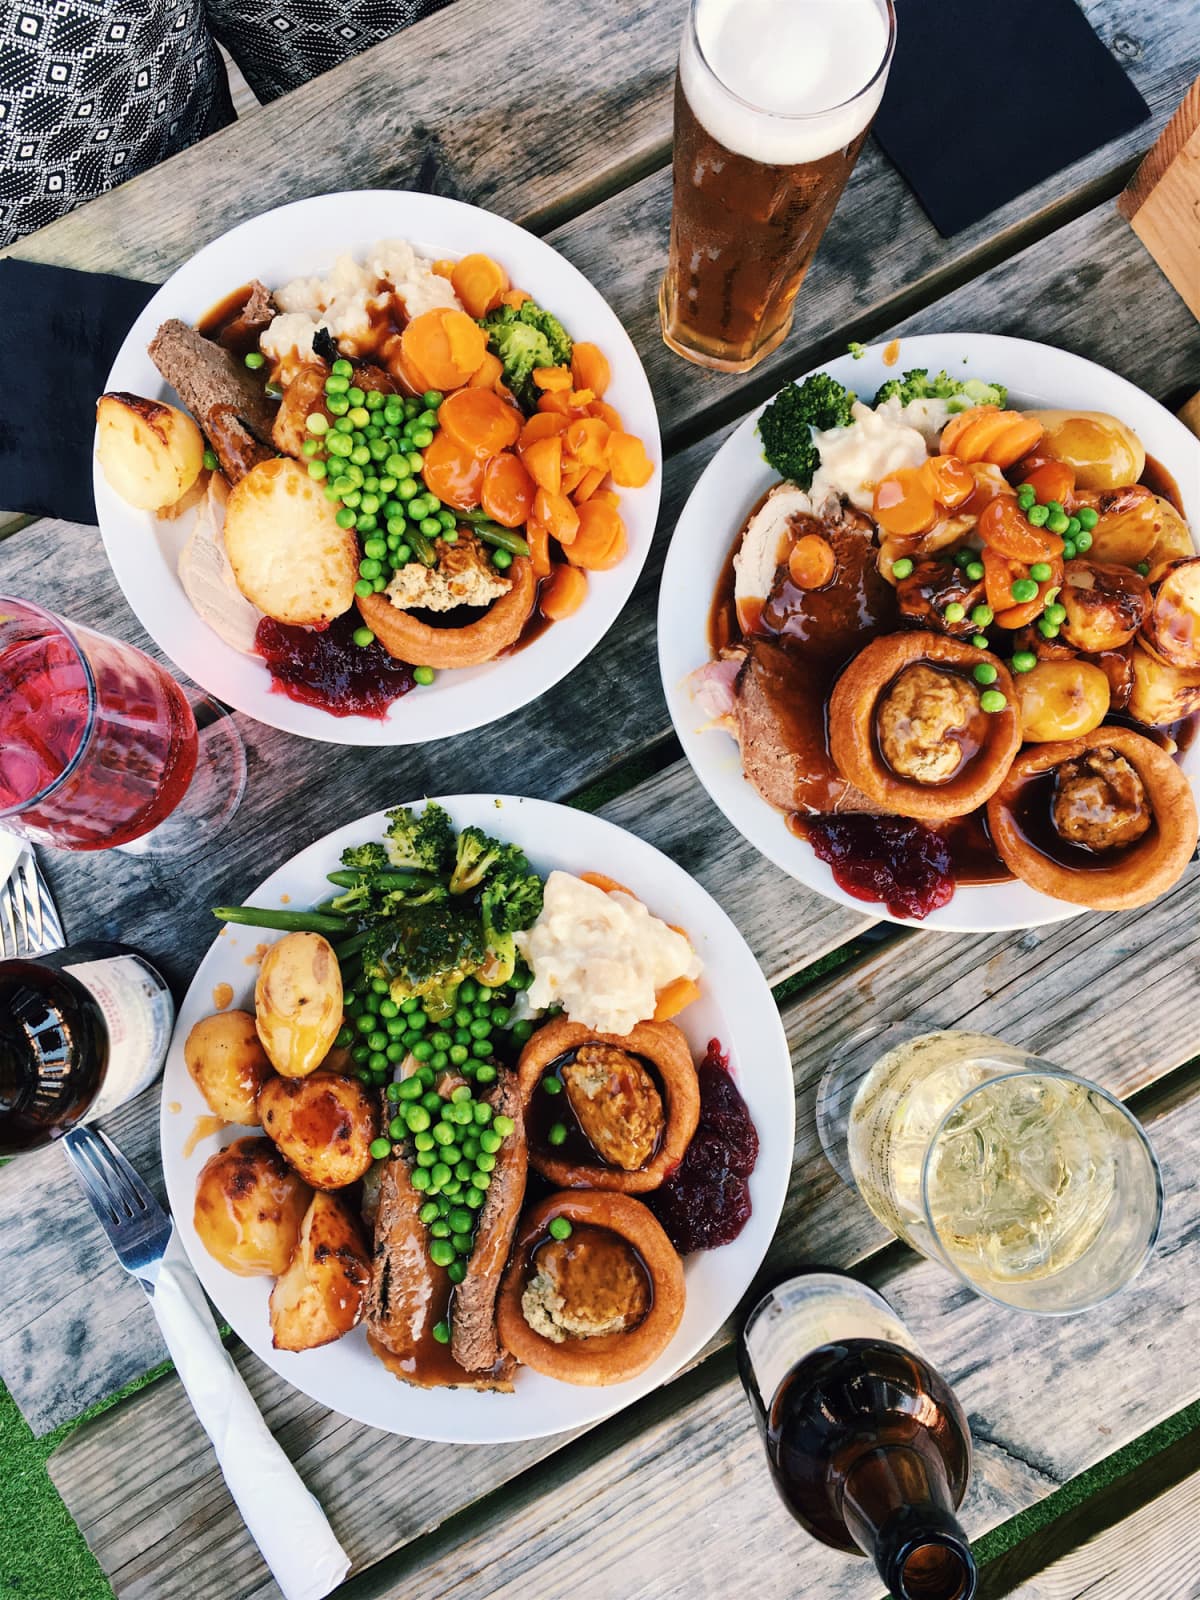 A plate of British Roast Dinner, with roast lamb, Yorkshire pudding, roast carrots, potatoes, broccoli and gravy, on a table in a pub in Highgate, London, UK